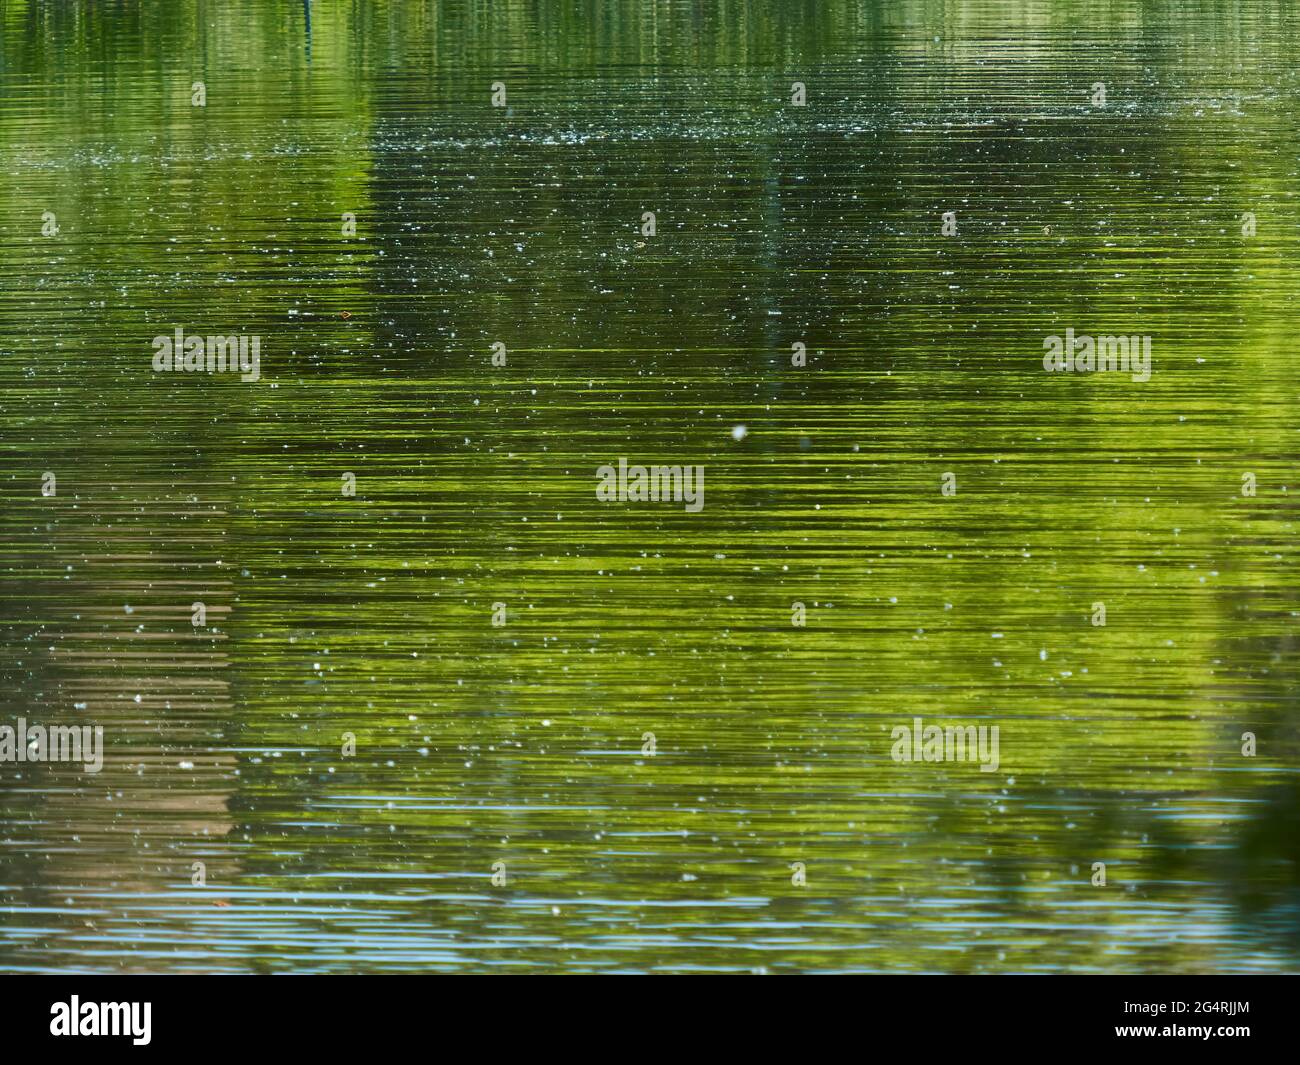 Abstract background made up of the reflection of trees, buildings and sky in Hampstead Ponds, broken up and fractured into striations by ripples. Stock Photo